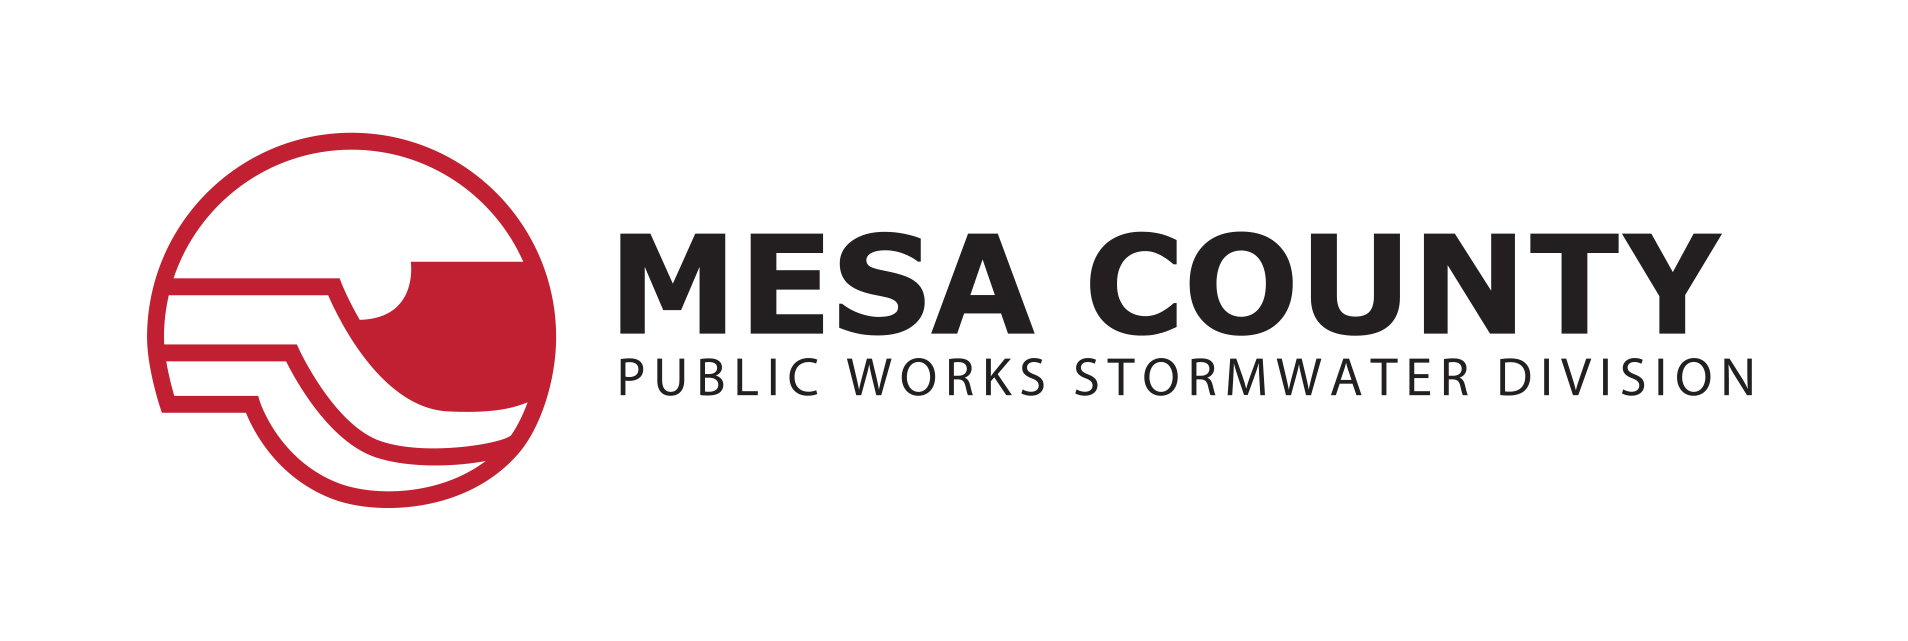 Mesa County Public Works Stormwater Division